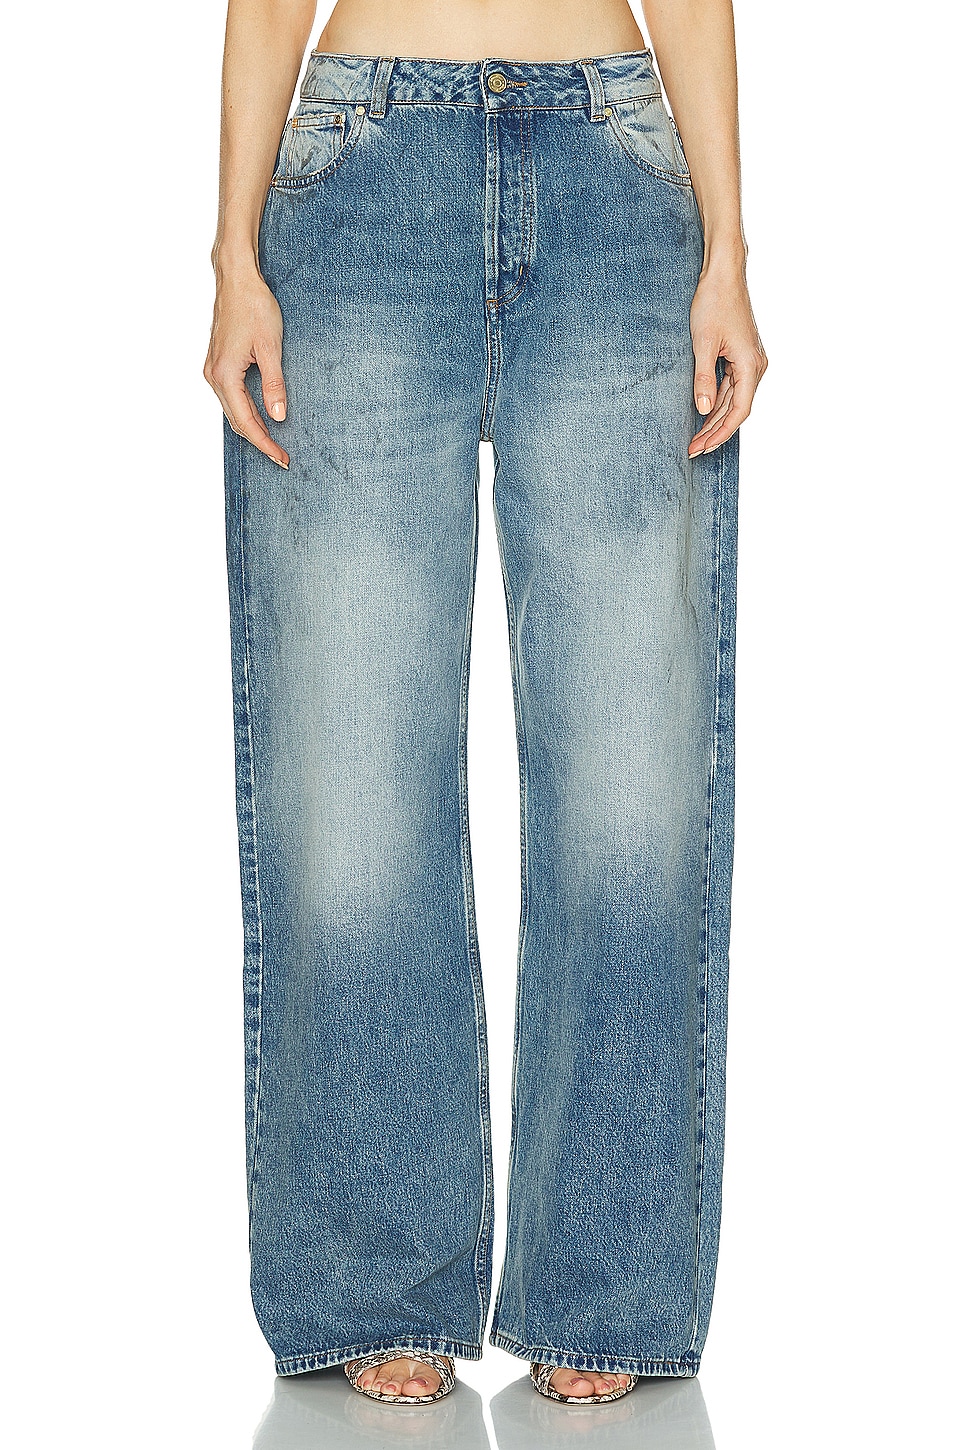 Image 1 of Heavy Manners Low Rise Baggy Denim in Vintage Wash